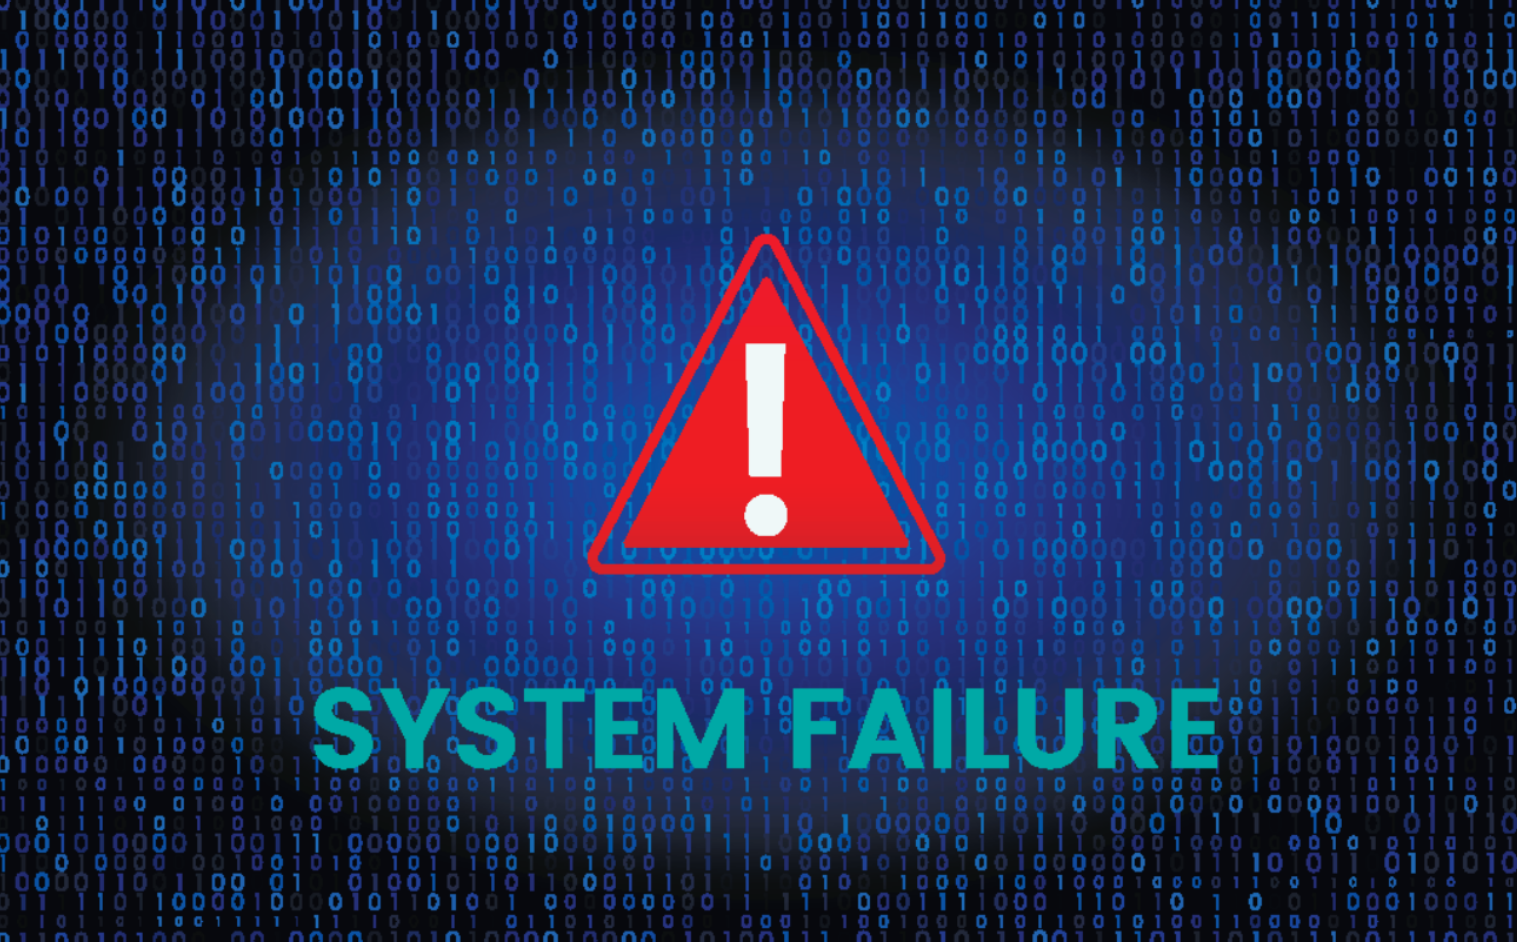 How to Prevent System Failure?